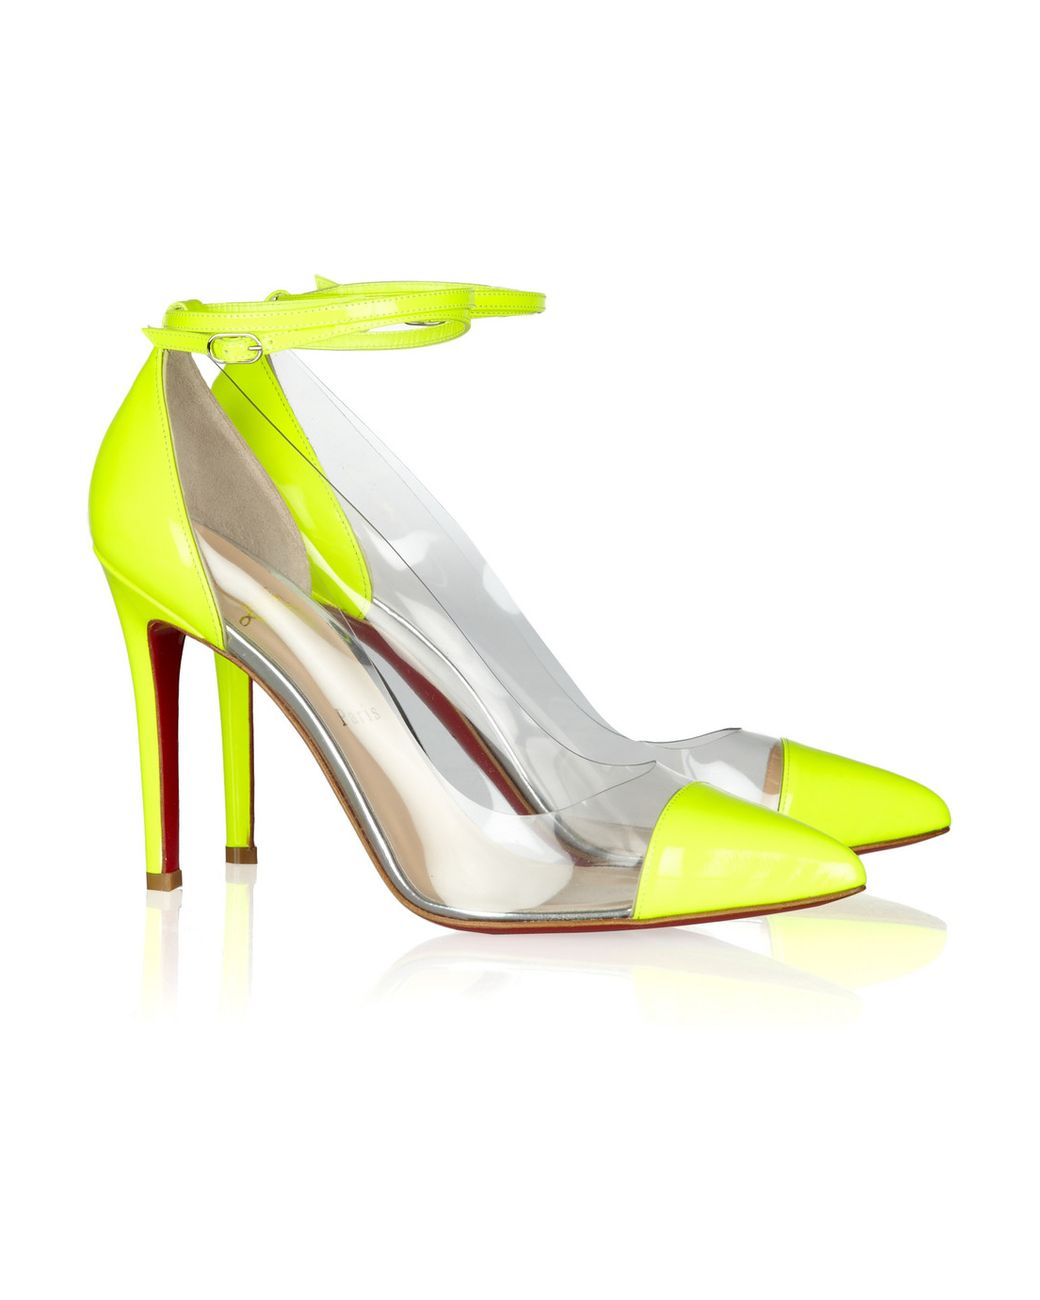 Christian Louboutin Un Bout 100 Patent Leather and Pvc Pumps | Lyst